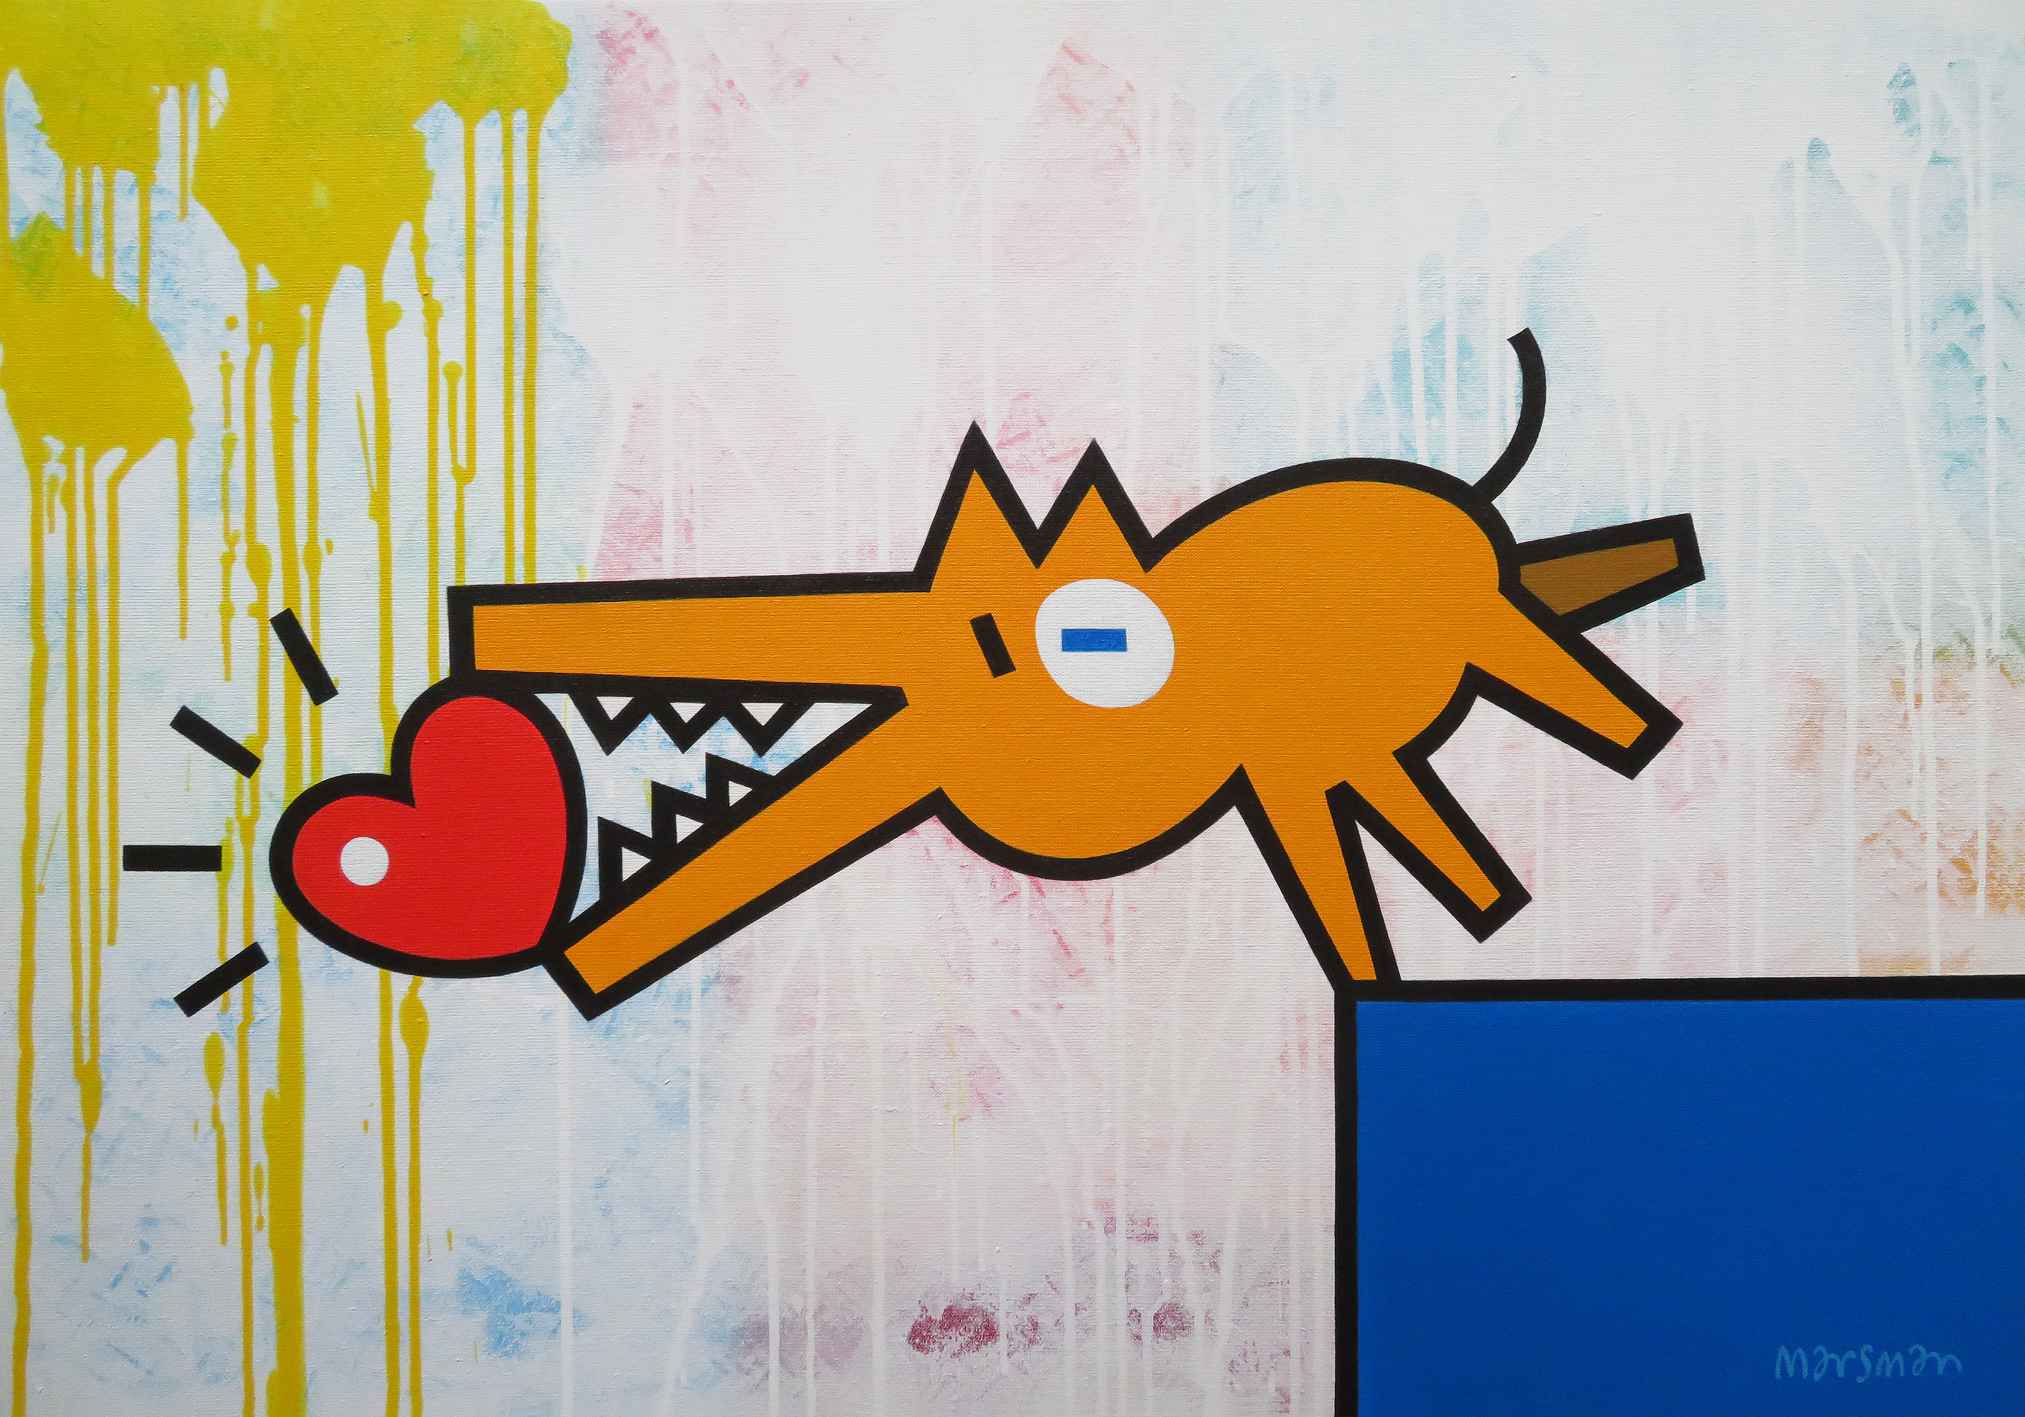 <b>LOVE-DOGGY (1)</b> - 100 x 70 x 3 cm - acrylic on canvas - FOR SALE  <a style="color: red; text-decoration: none" href="mailto:jpgpmarsman@onsbrabantnet.nl">BESTEL</a>